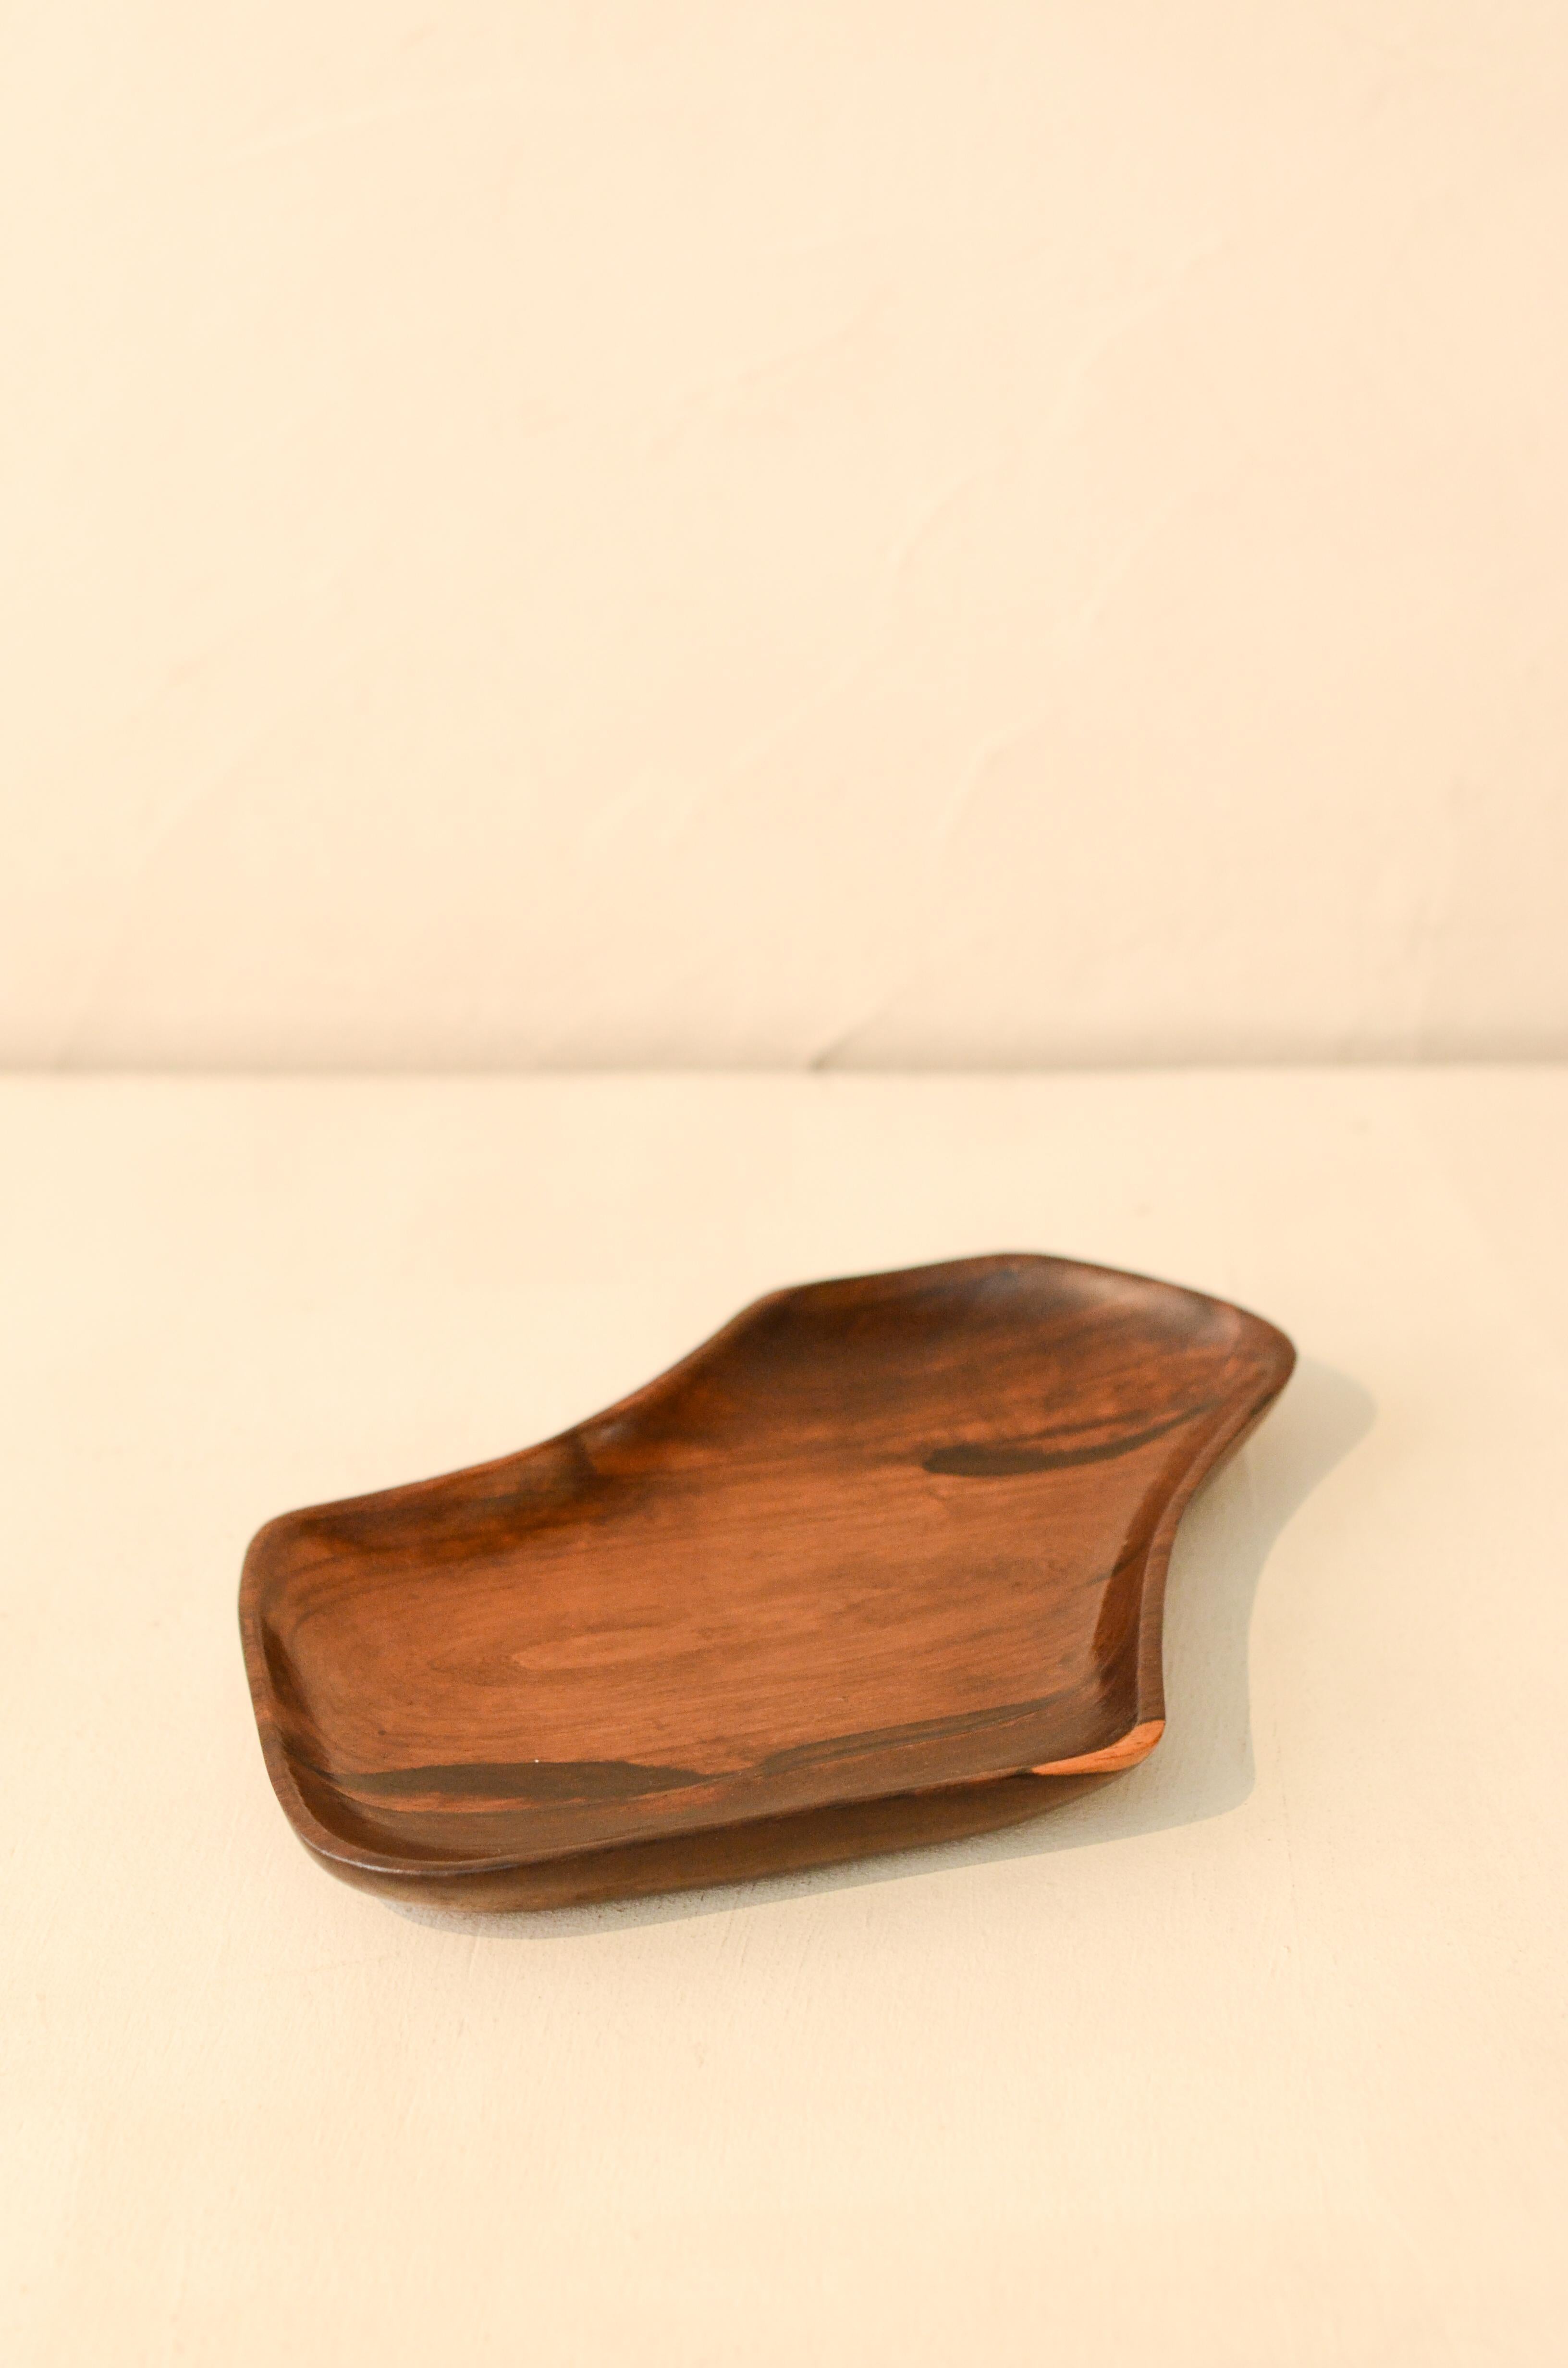 Woodwork Brazilian Midcentury Organic Bowl in Rosewood, c. 1970 For Sale